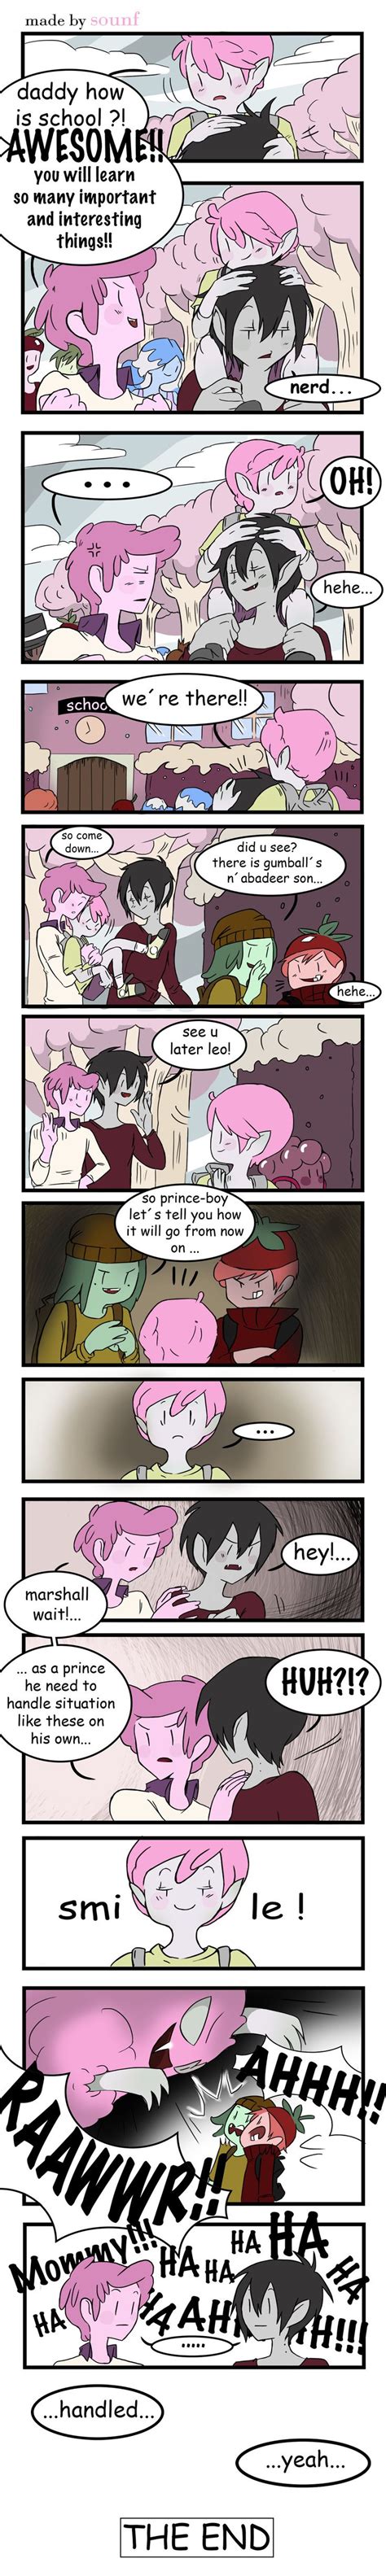 Comic 7 By Sounf On DeviantArt Marshall Lee X Prince Gumball GumLee